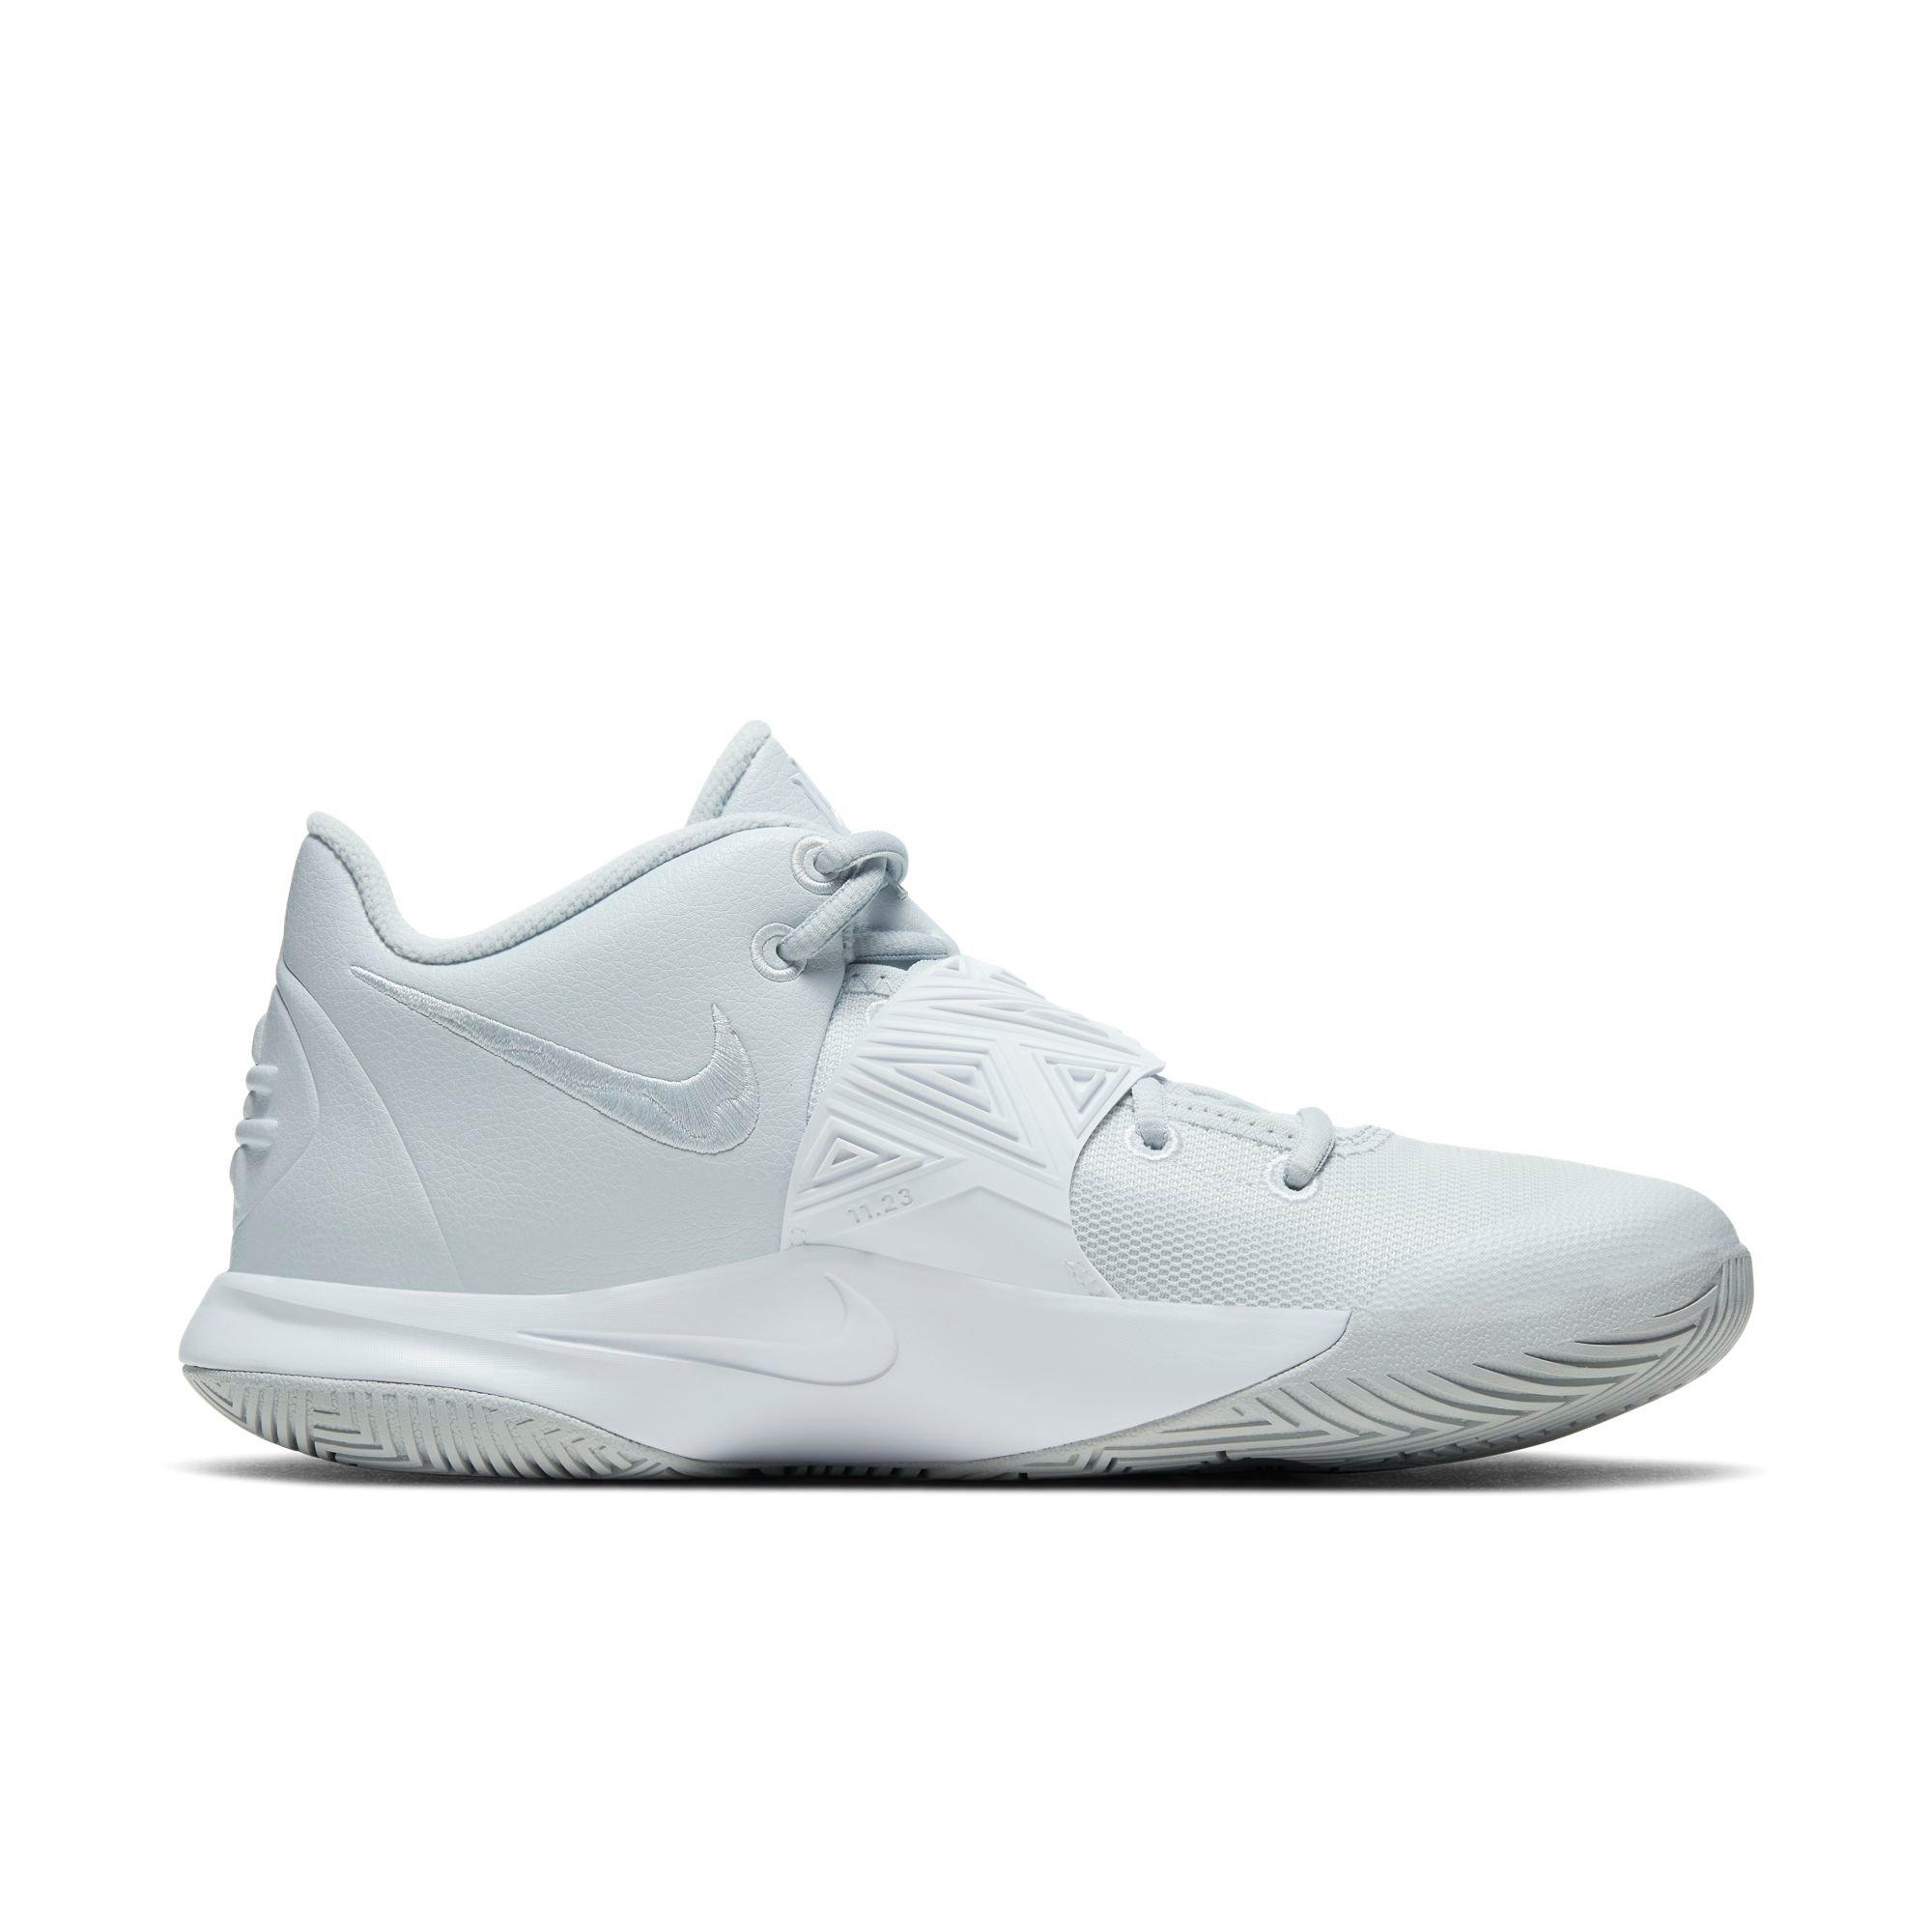 women's kyrie basketball shoes